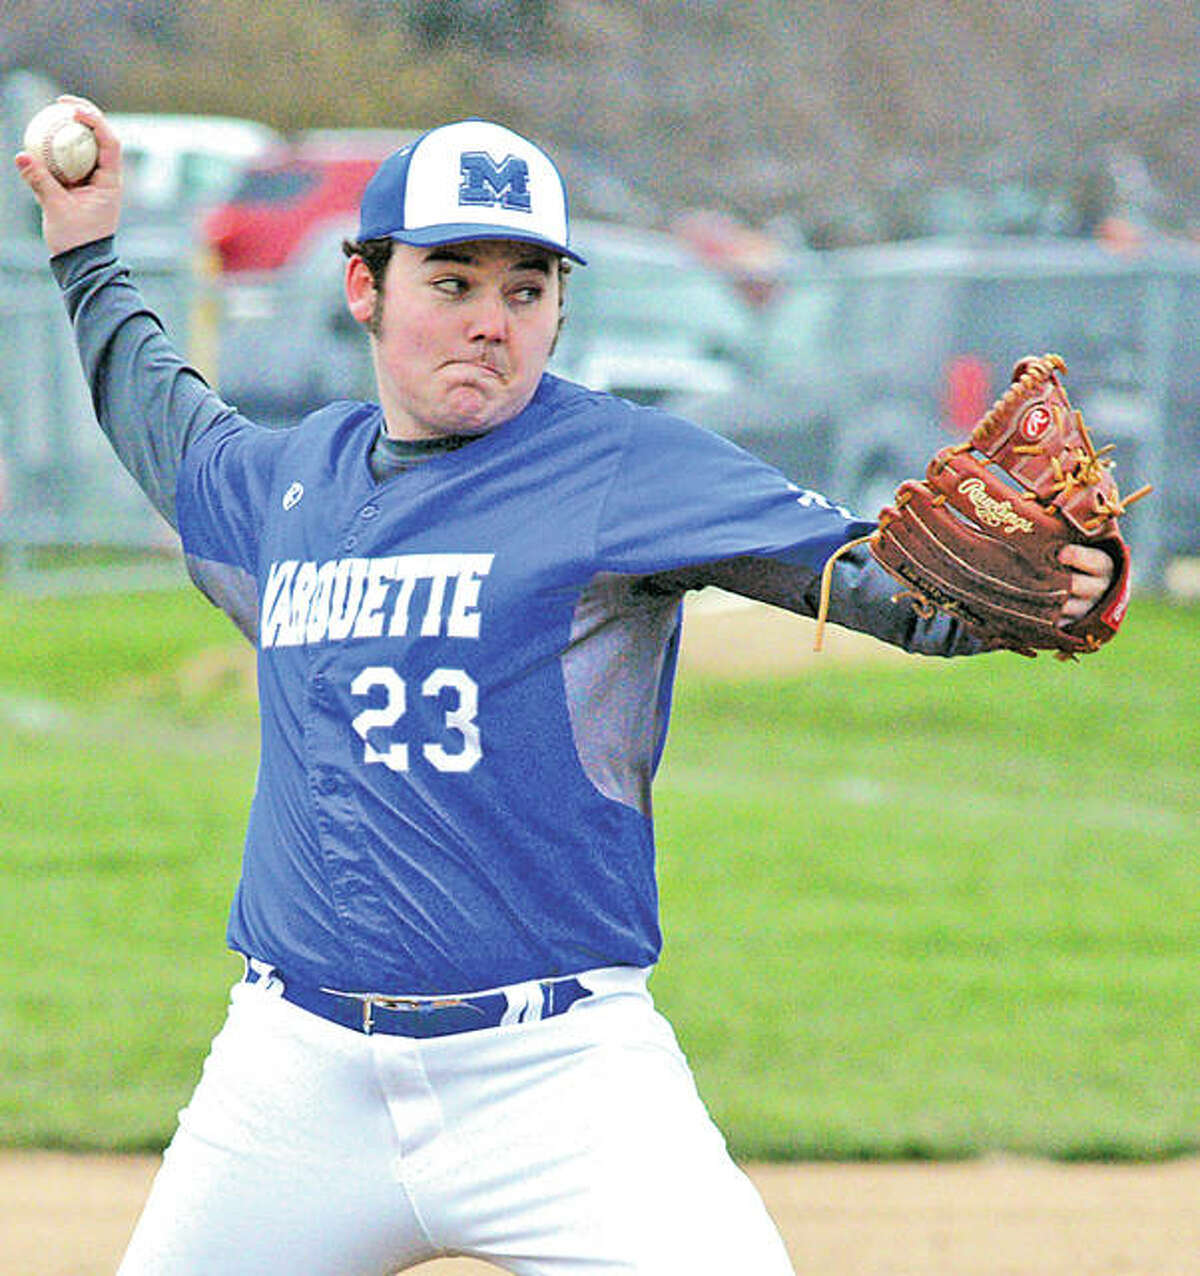 Marquette’s Luke Simmons scattered seven hits, walked five and struck out nine in his team’s 8-3 victory over East Alton-Wood River Friday.